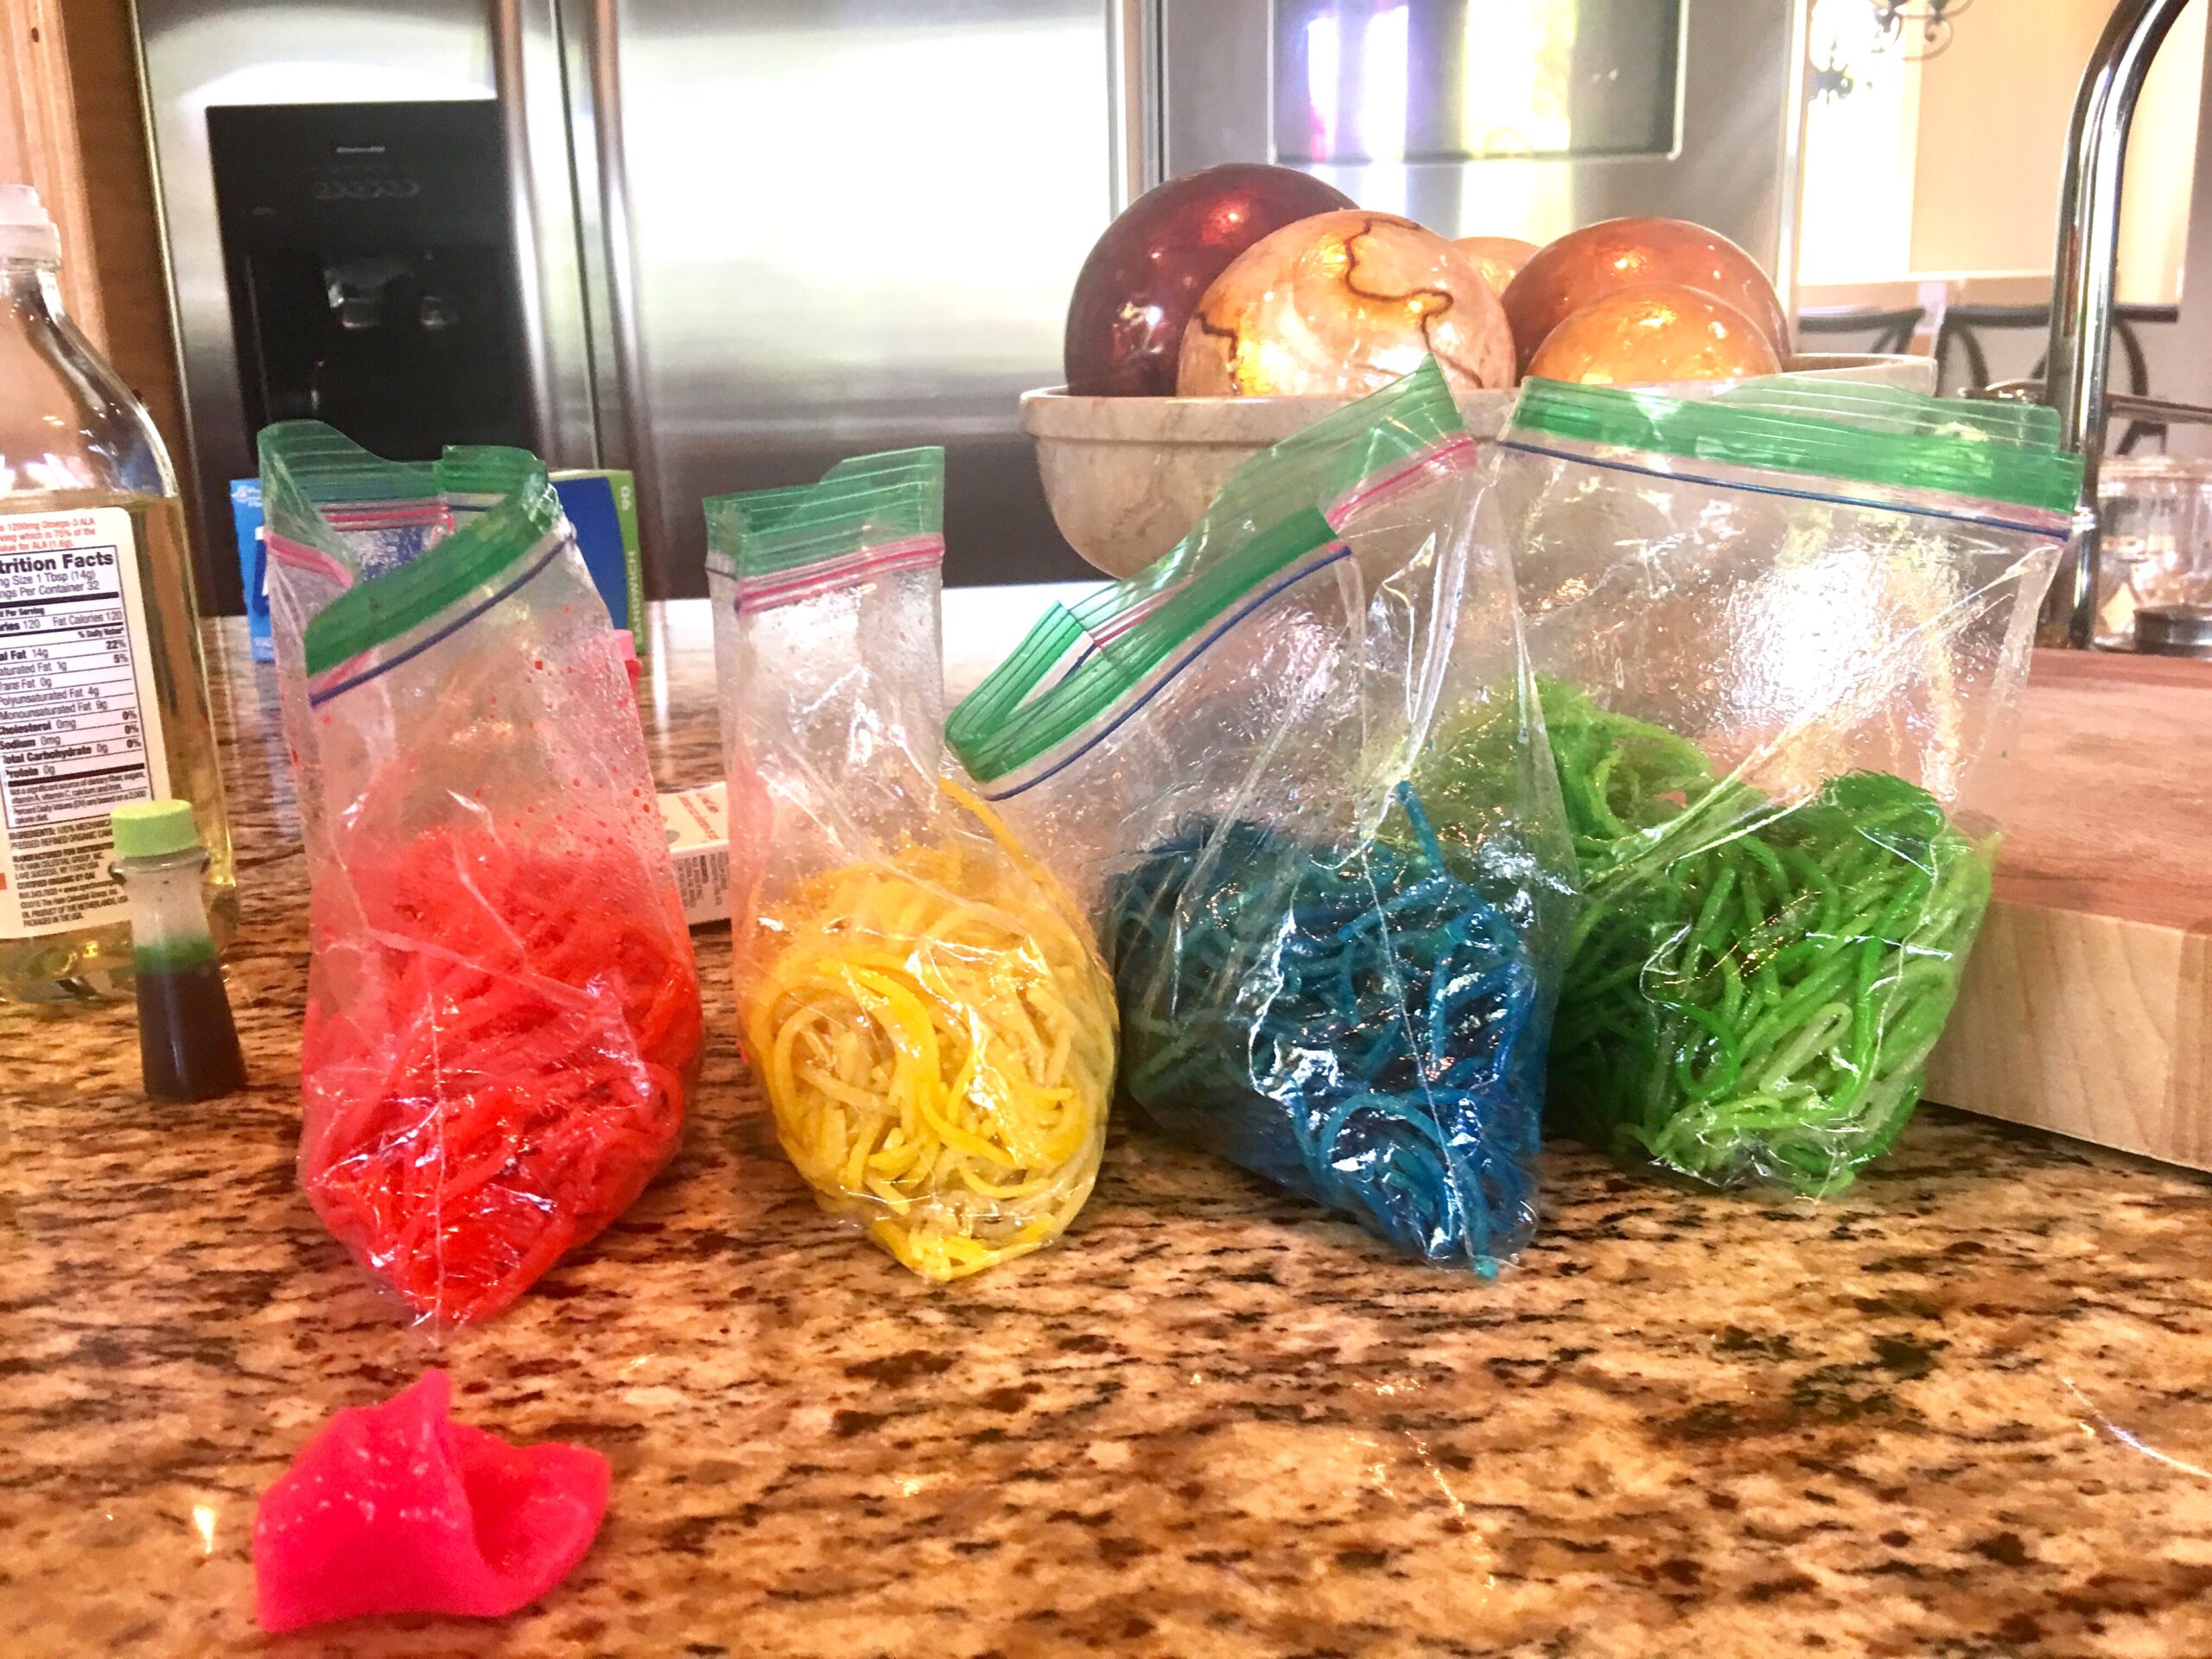 This simple Rainbow sensory bin is great for color recognition, increasing fine motor skills, and provides great texture. Rainbow Pasta sensory bins - sensory play is so theraputic for children, great way to increase fine motor skills and provides a safe environment for exploring.